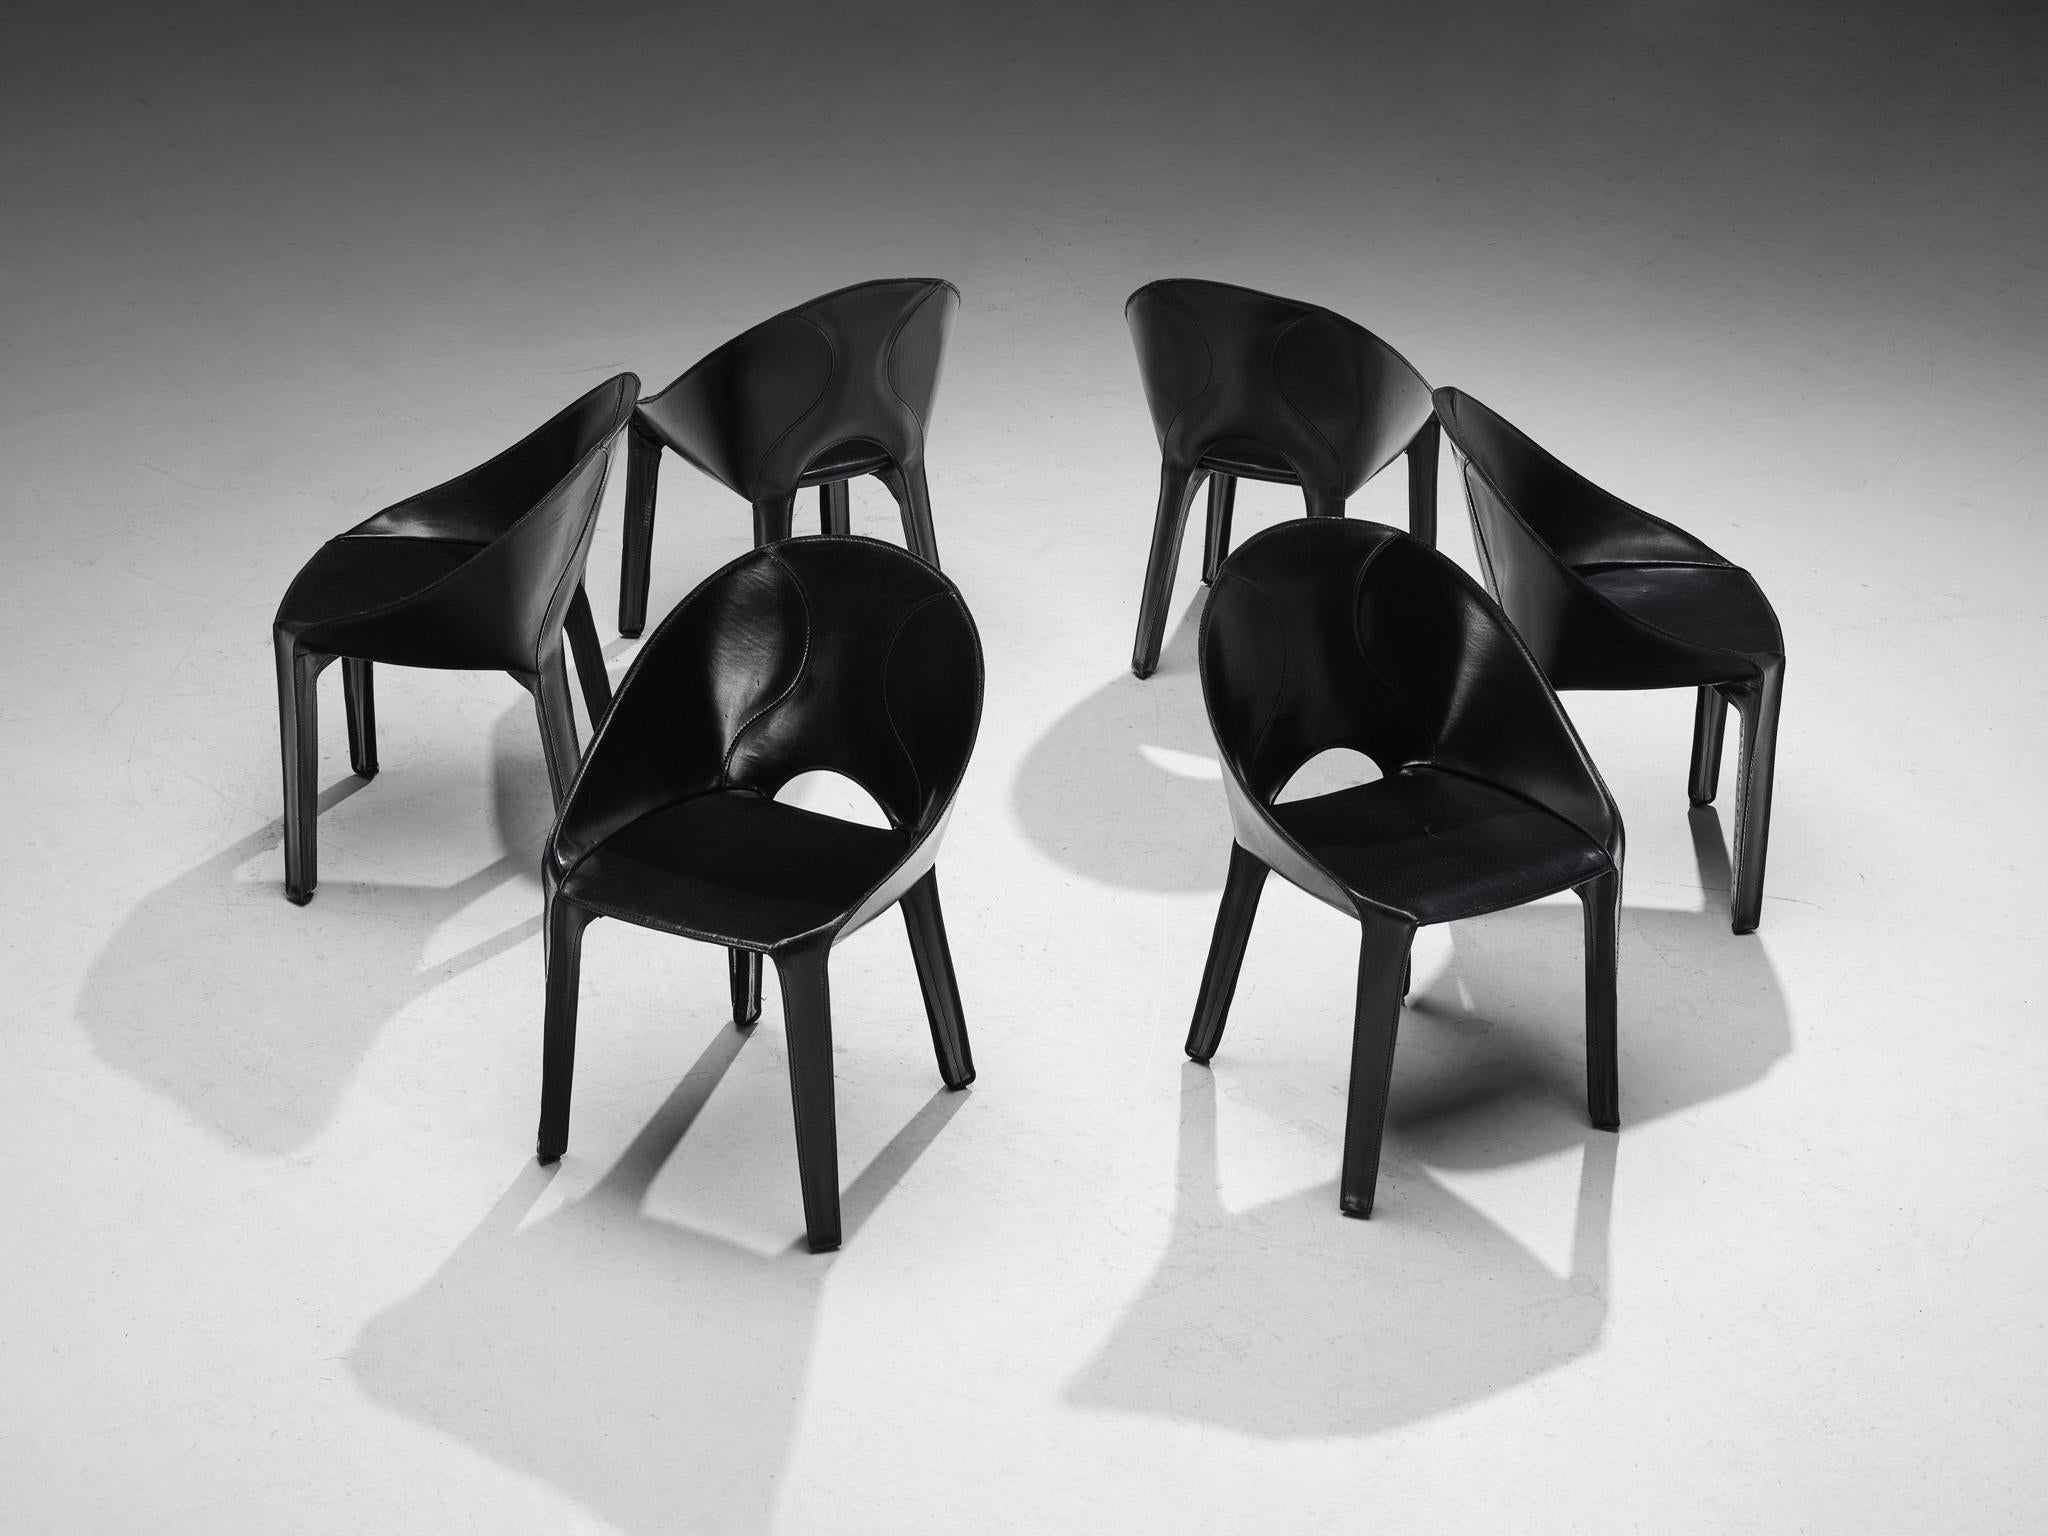 Afra & Tobia Scarpa 'Polygonon' Dining Table & Mario Bellini Dining Chairs